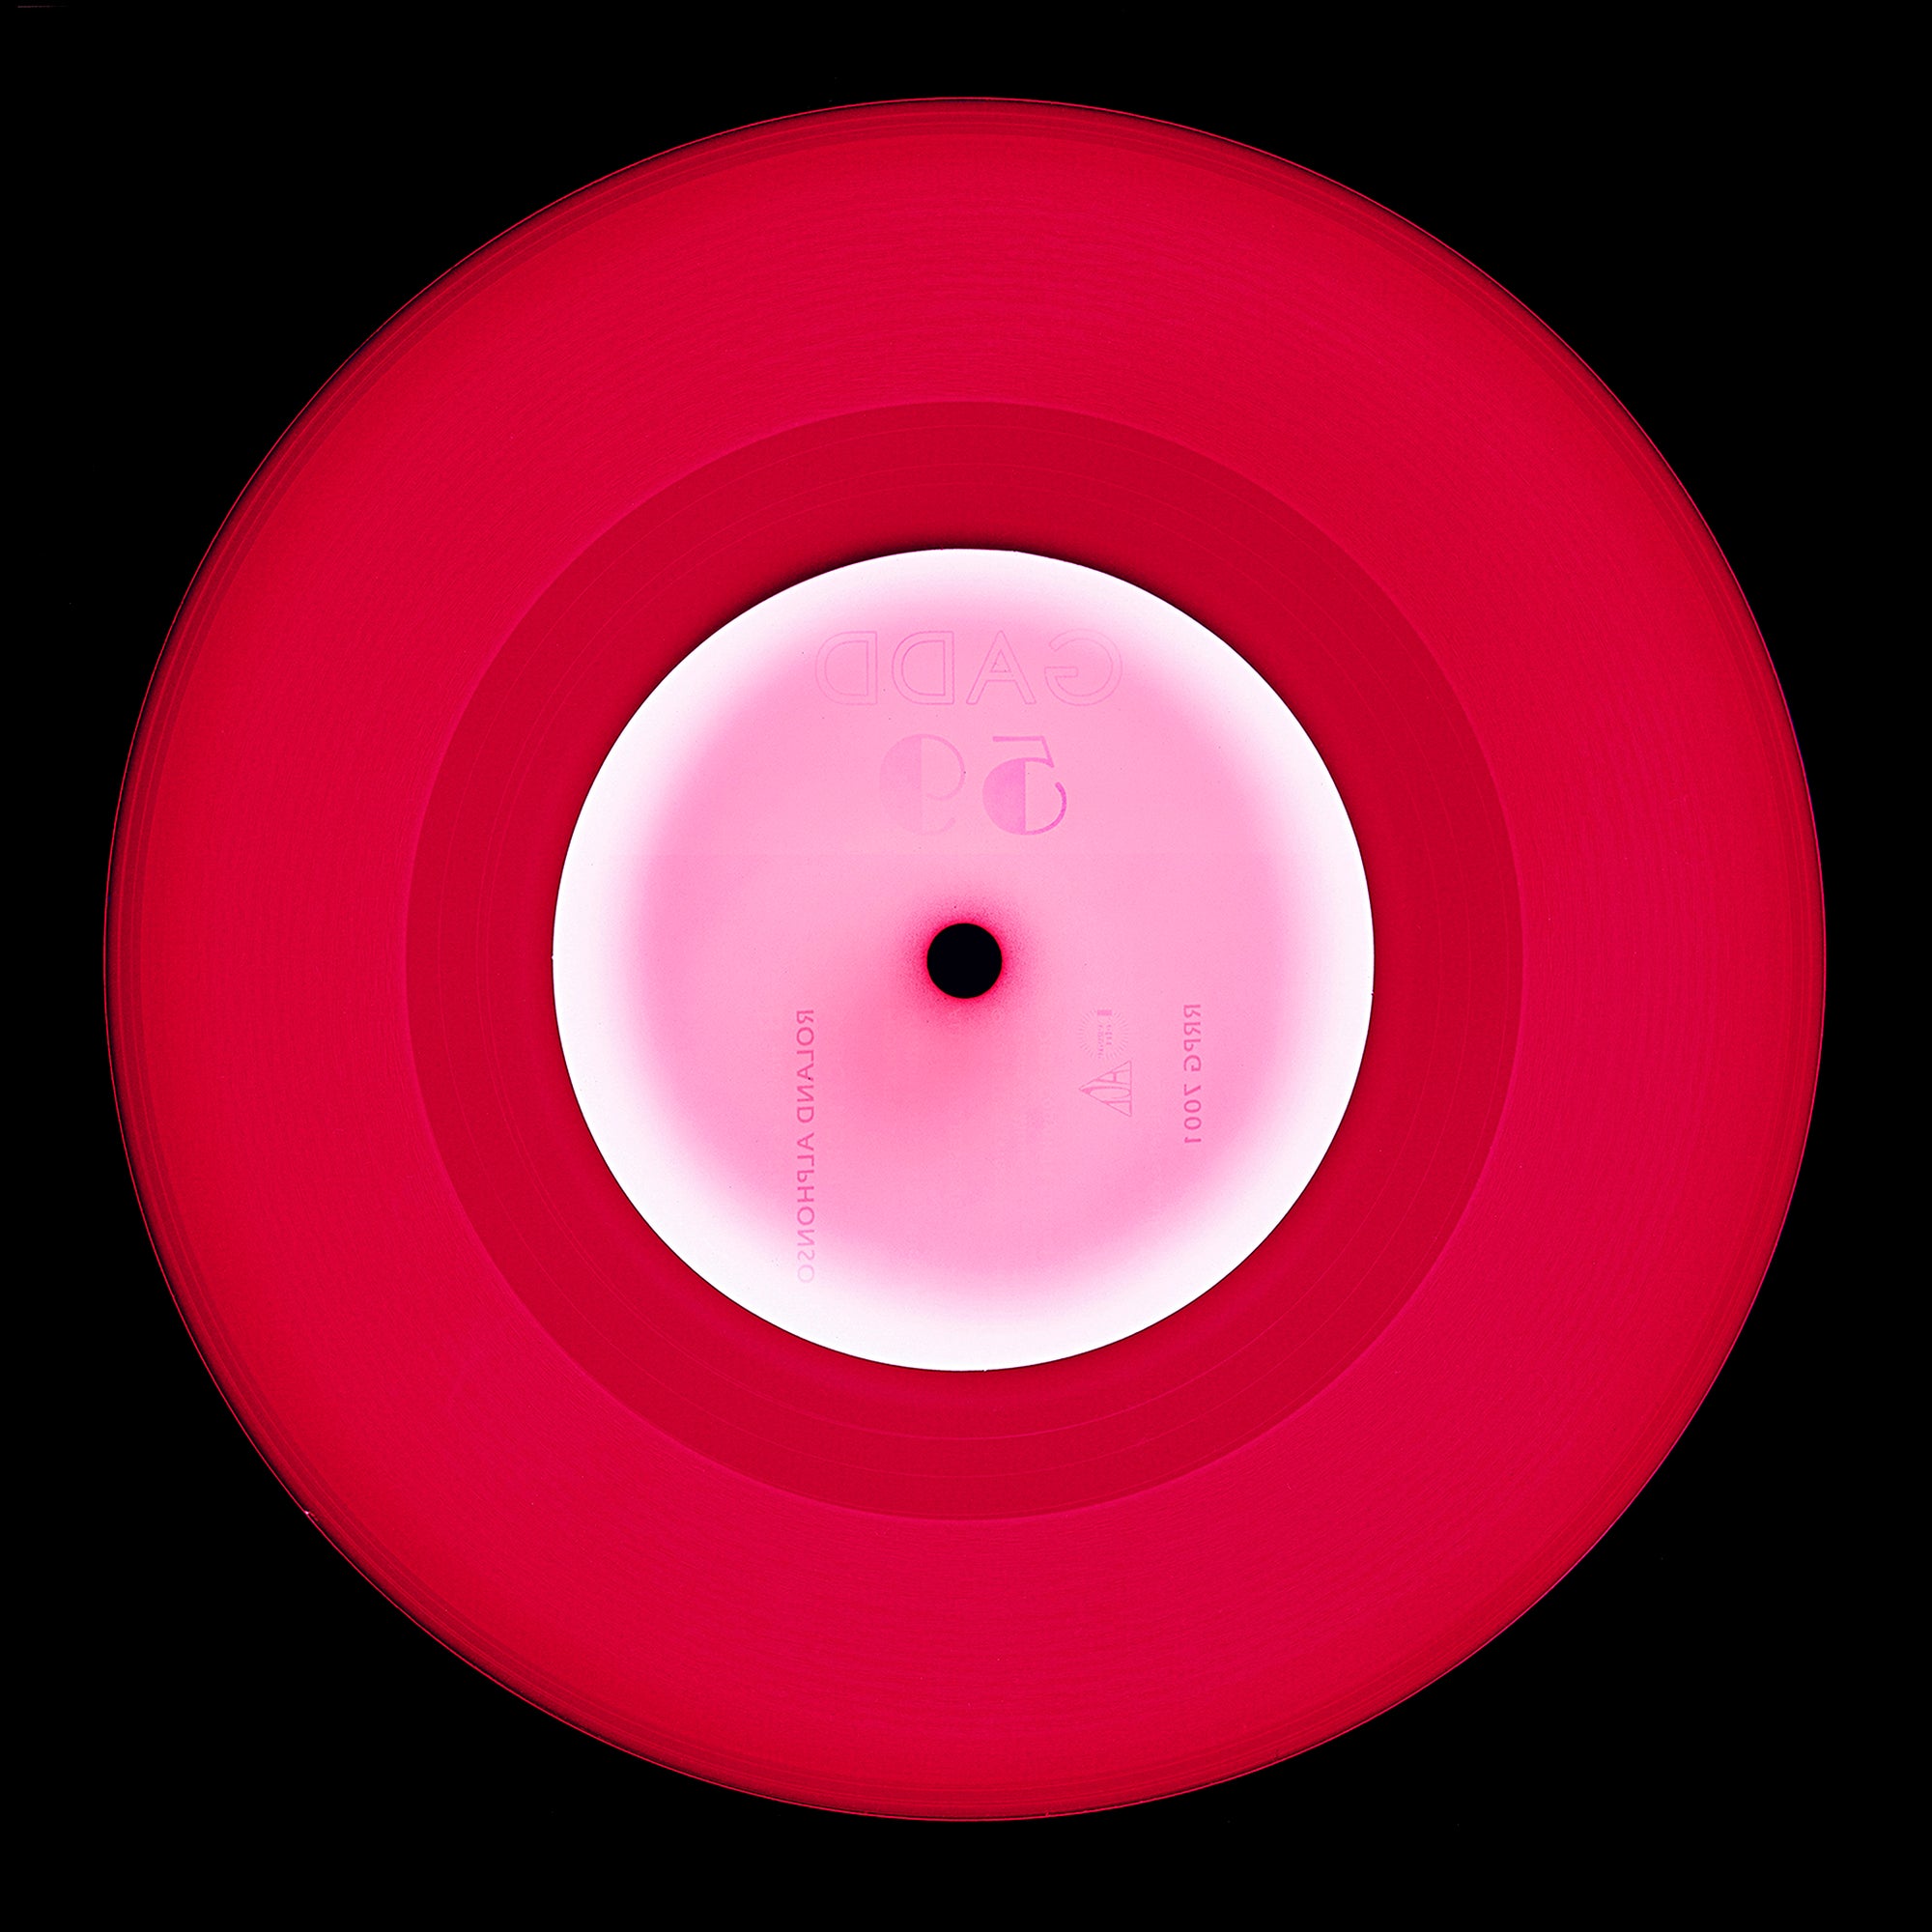 Red circle pop art from the Heidler and Heeps vinyl record collection